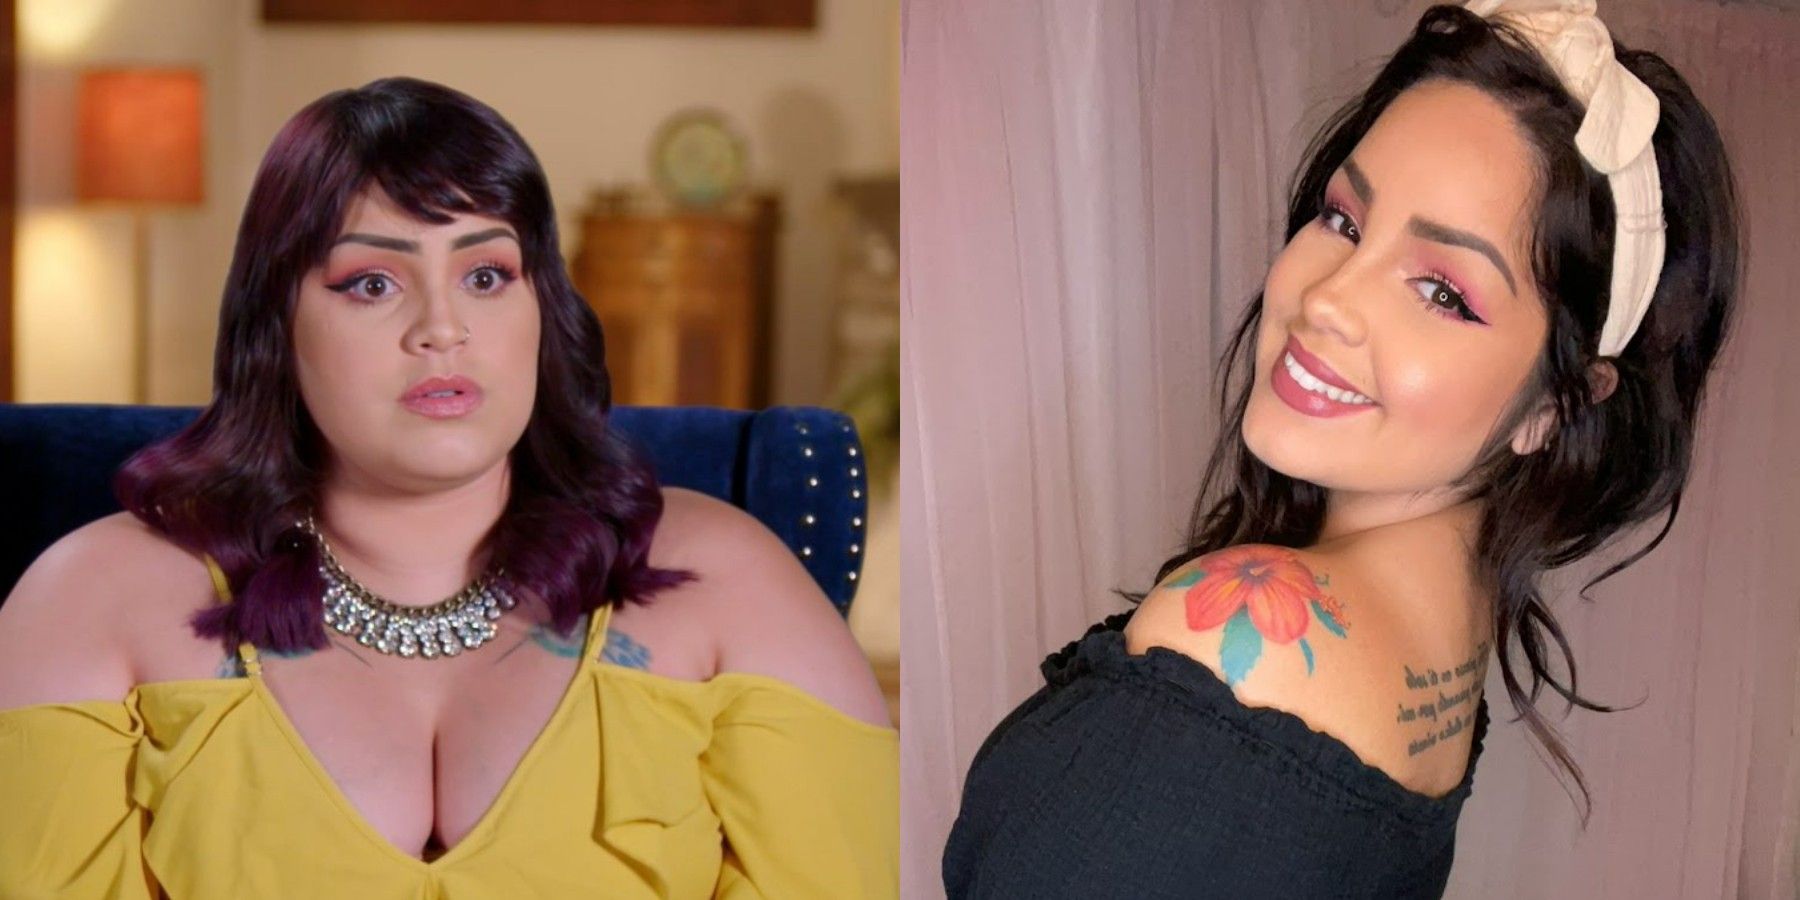 What Type of Weight Loss Surgery Did Tiffany Franco Have?